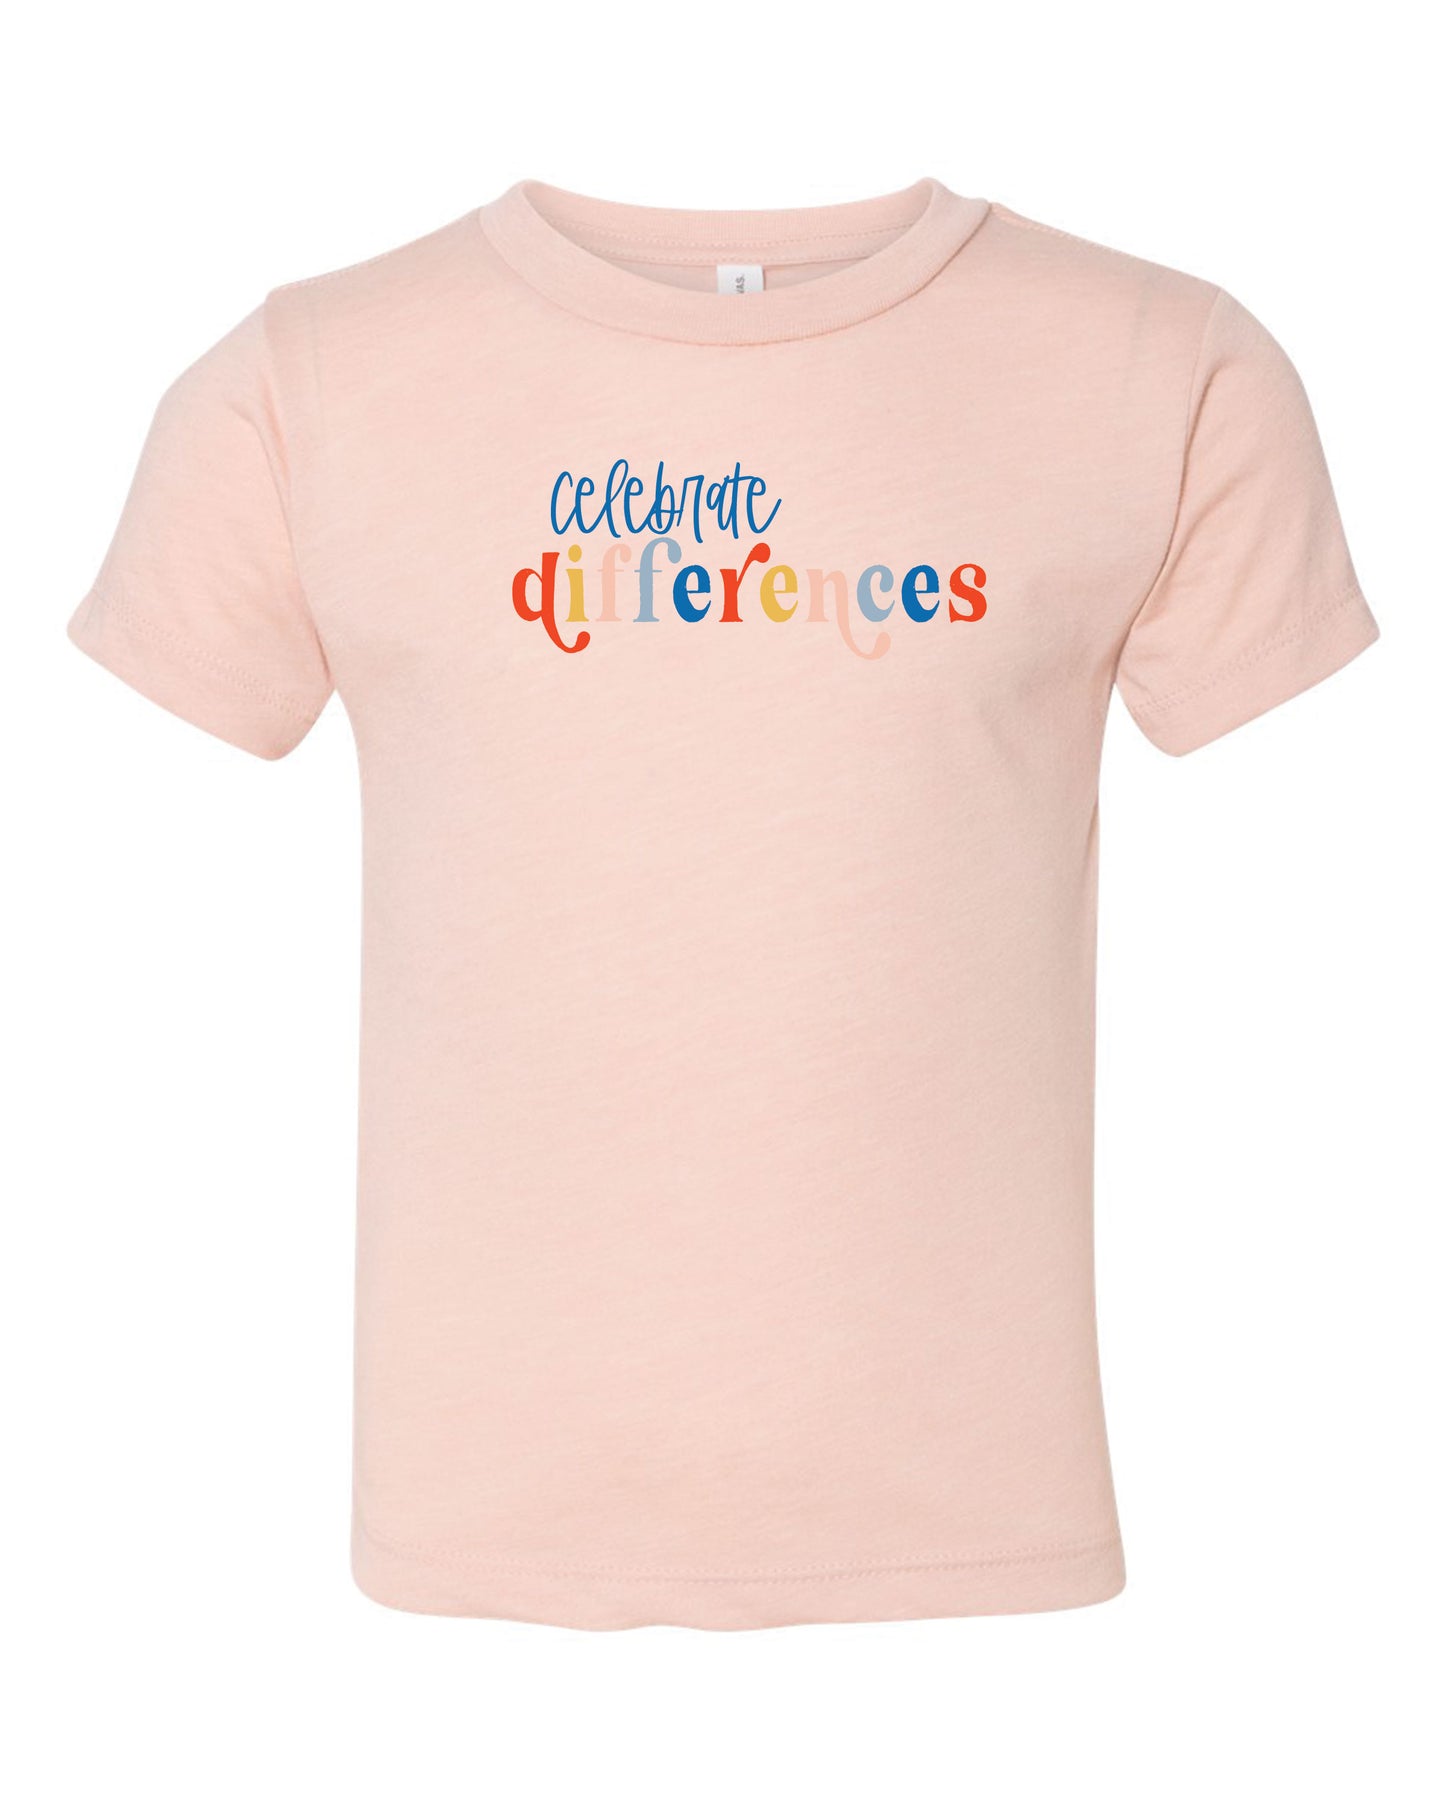 Celebrate Differences | Kids Tee-Kids Tees-Sister Shirts-Sister Shirts, Cute & Custom Tees for Mama & Littles in Trussville, Alabama.